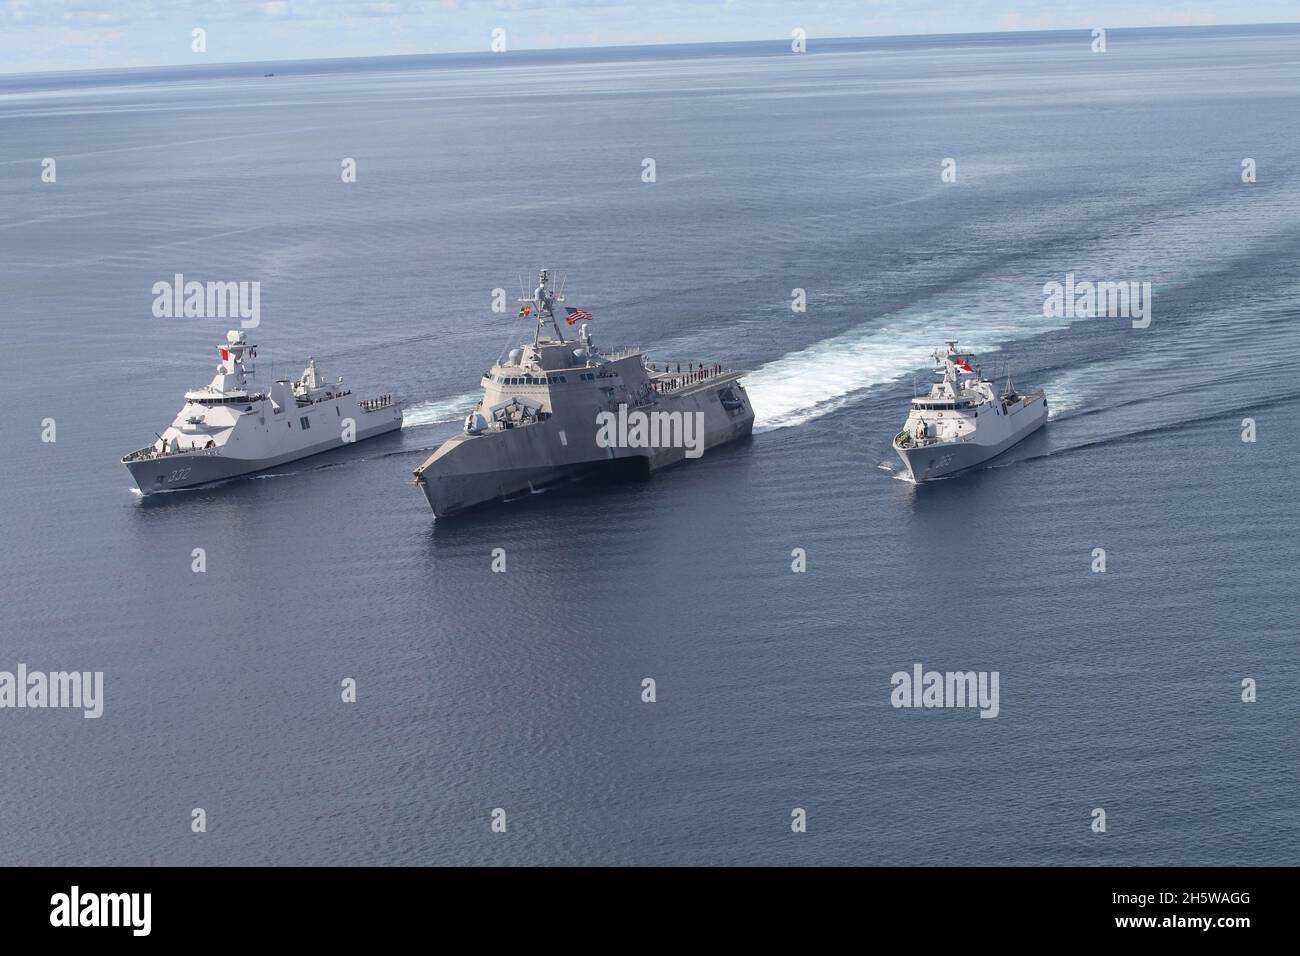 U.S. Navy Independence-variant littoral combat ship USS Jackson, center, sails with the Indonesian Navy Martadinata-class frigate KRI I Gusti Ngurah Rai, right, and the Indonesian Navy Diponegoro-class corvette KRI Diponegoro during Cooperation Afloat and Readiness and Training November 9, 2021in the Java Sea. Stock Photo